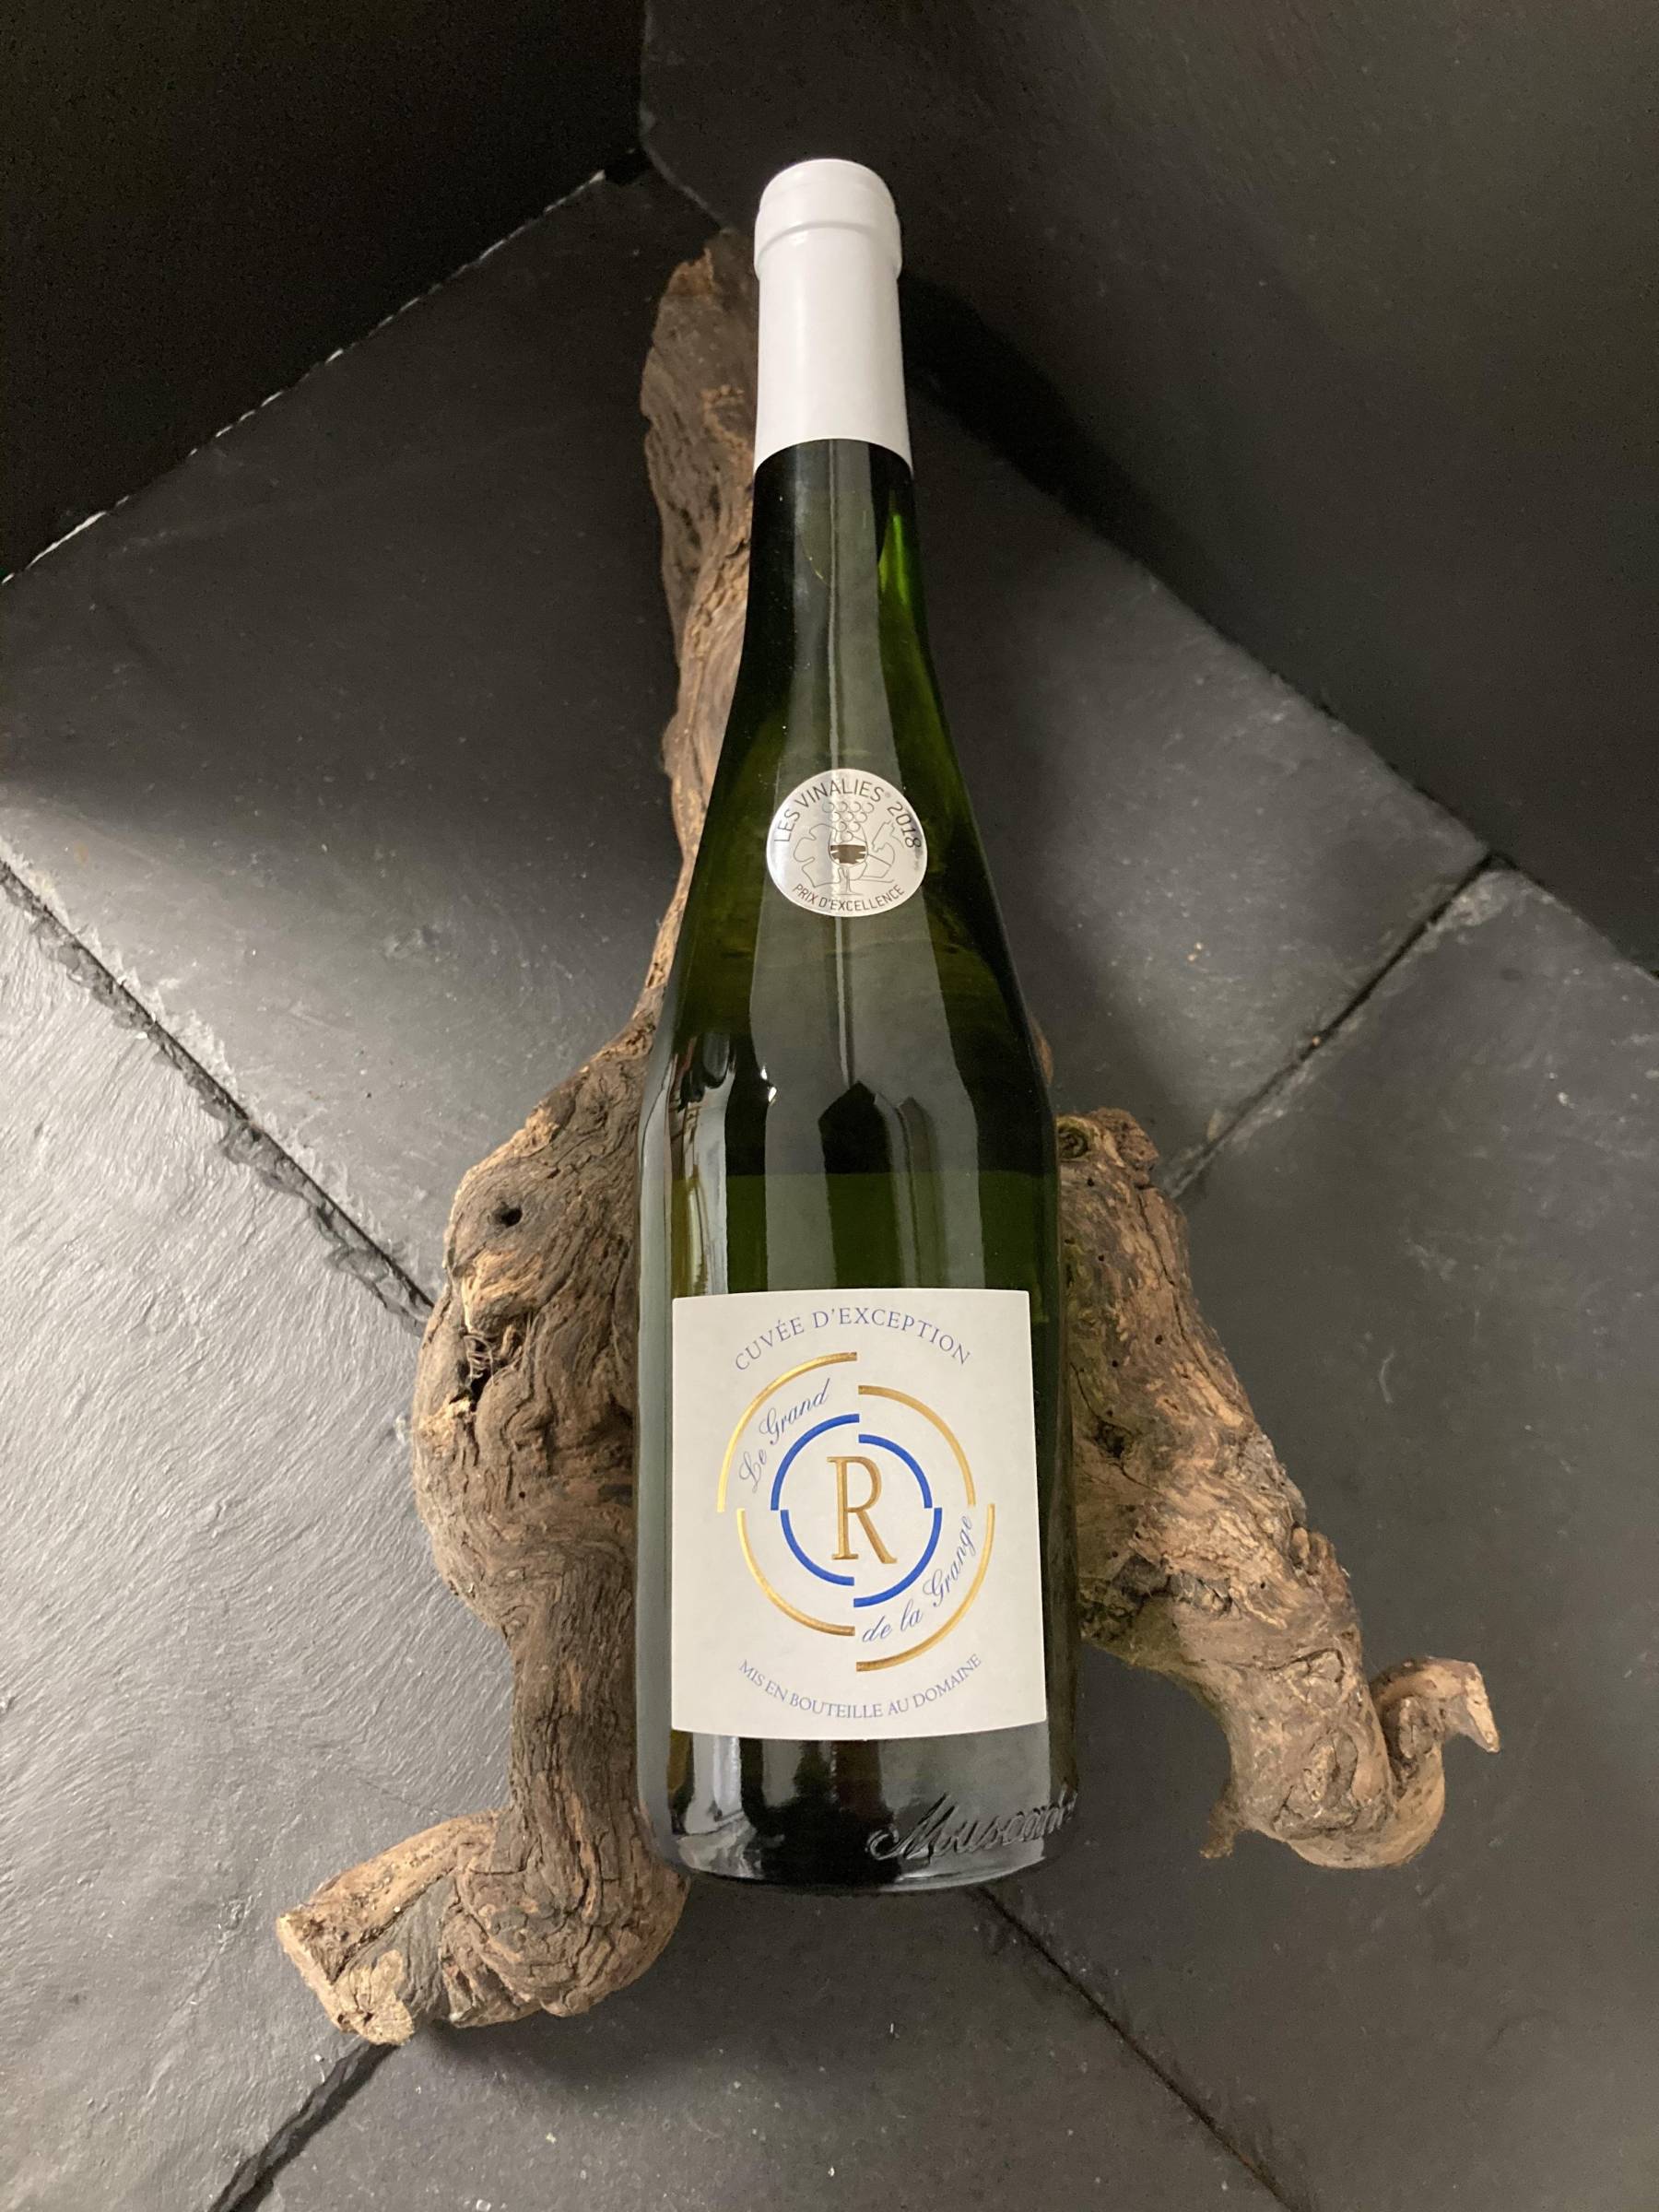 MUSCADET GRAND R CUVEE EXCEPTION